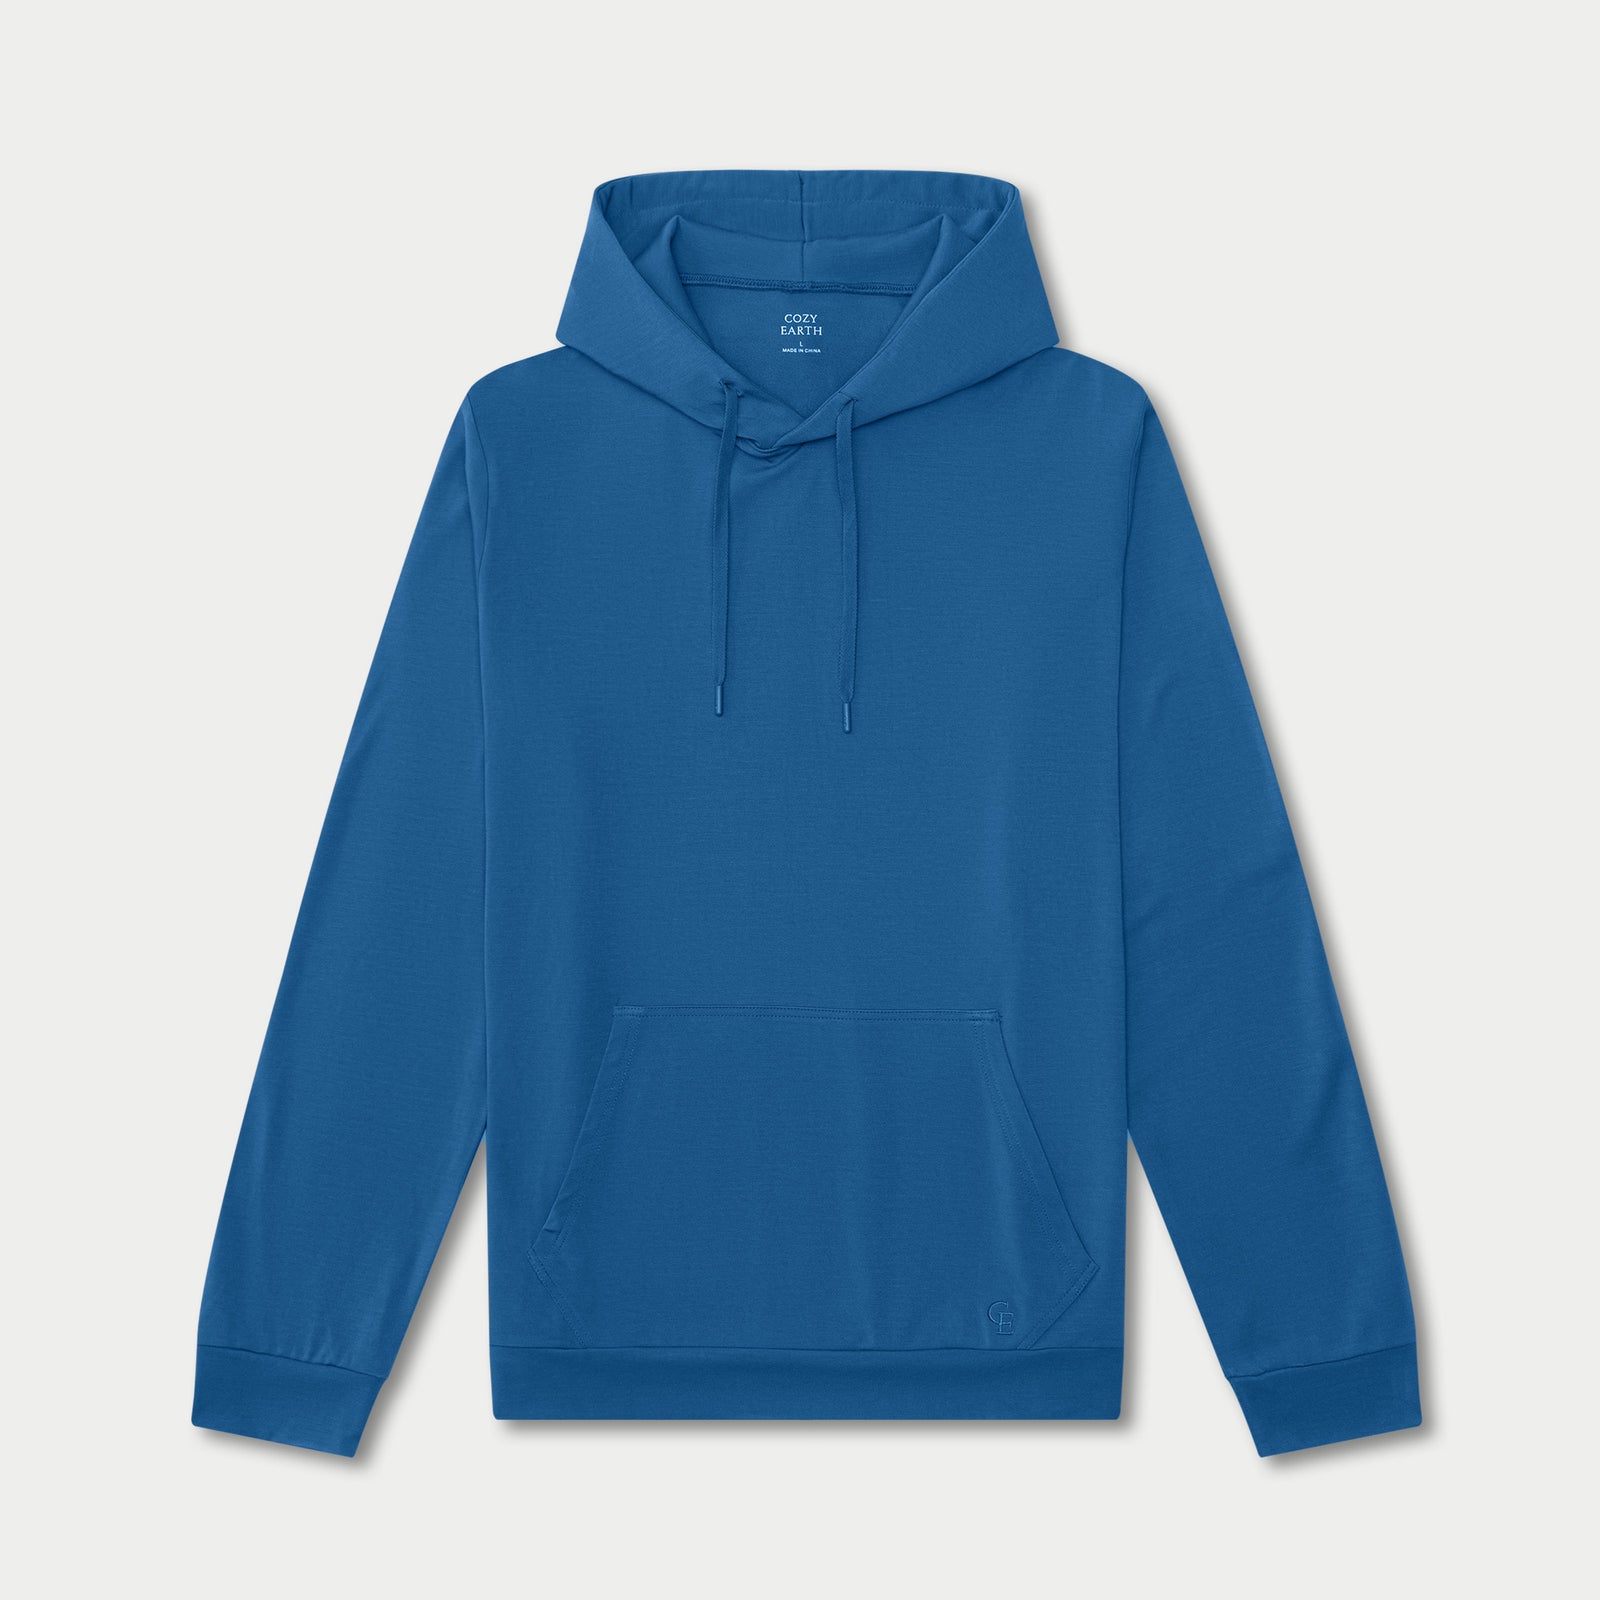 Cobalt Bamboo Hoodie. Photo of hoodie taken in front of white background.